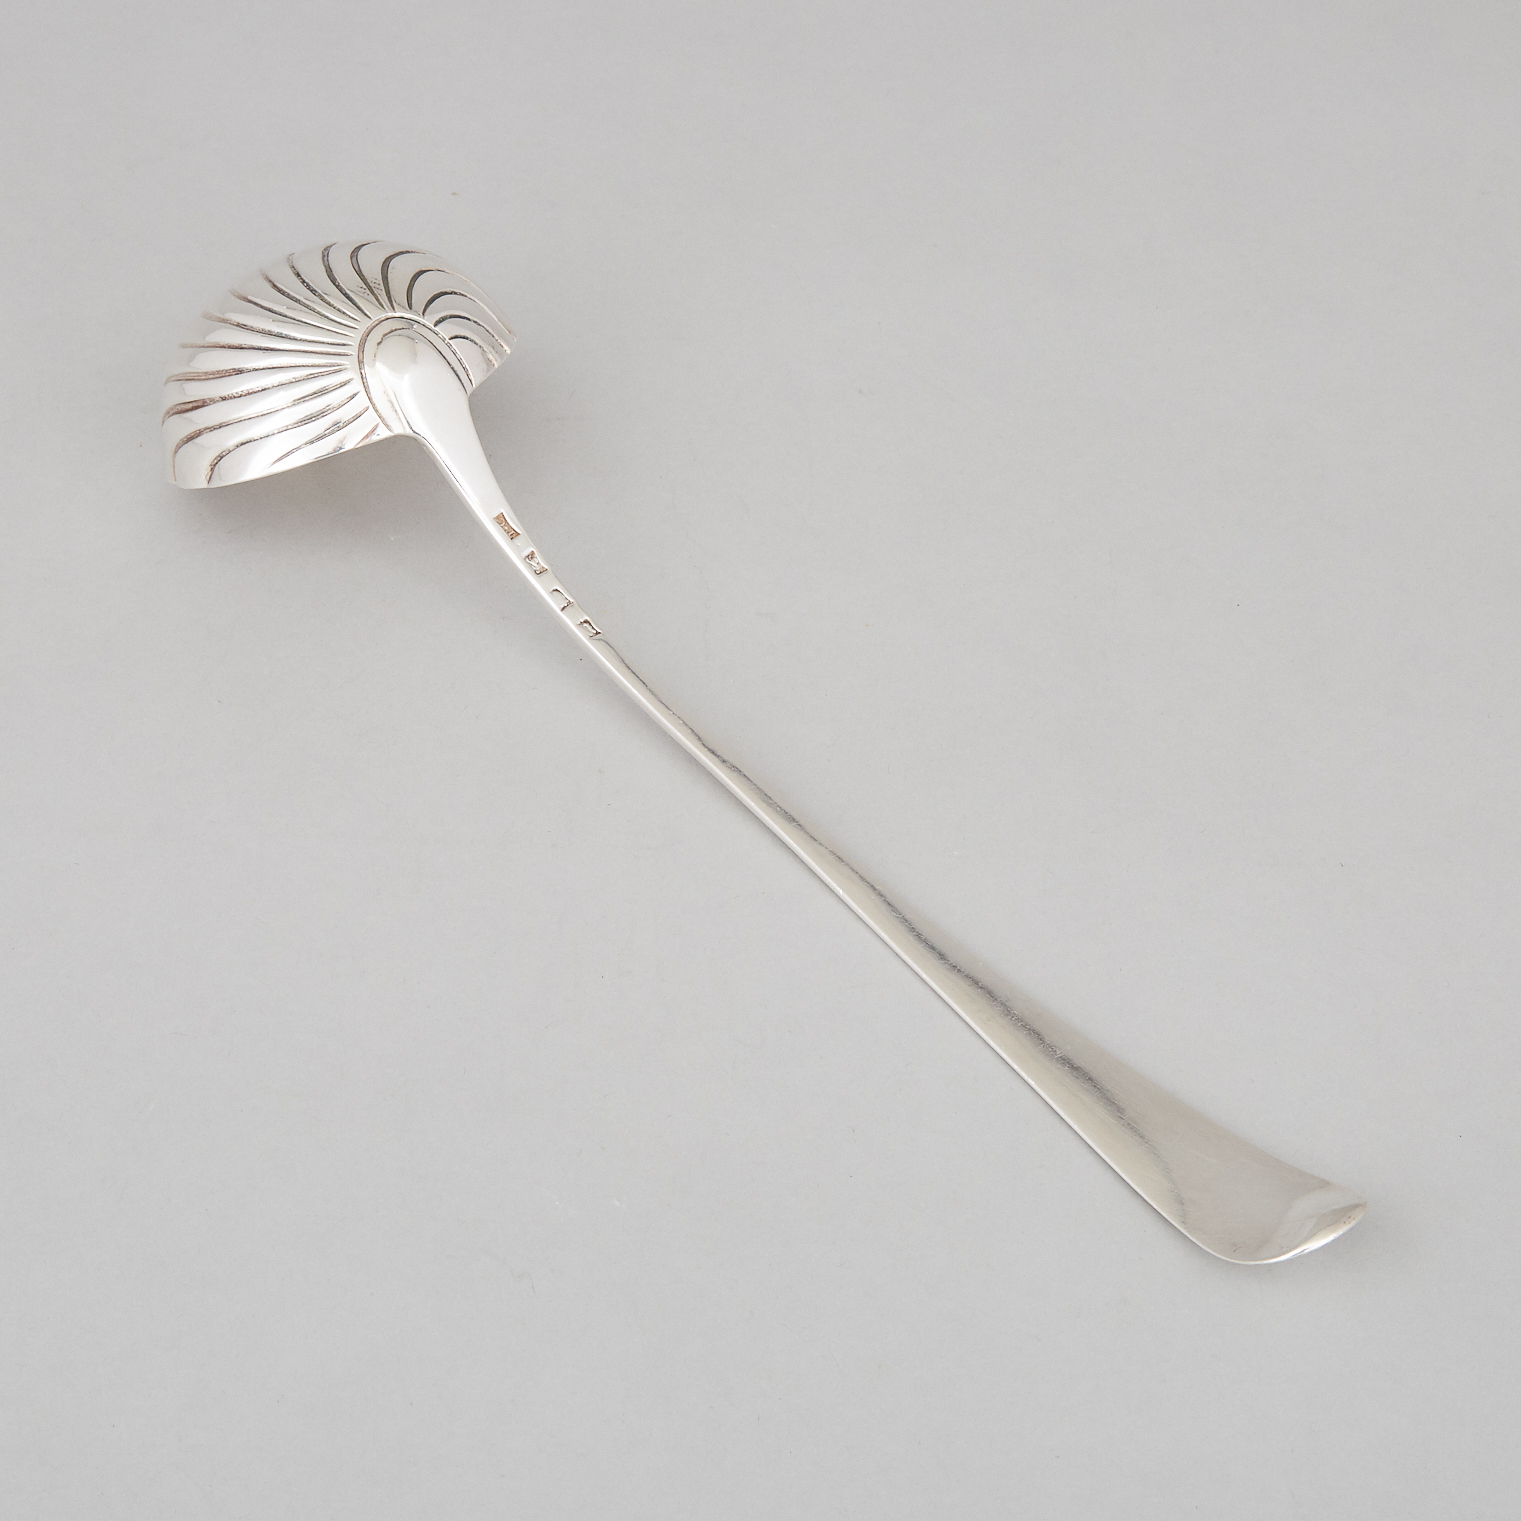 George III Silver Feather-Edged Old English Pattern Soup Ladle, Thomas Chawner, London, 1772